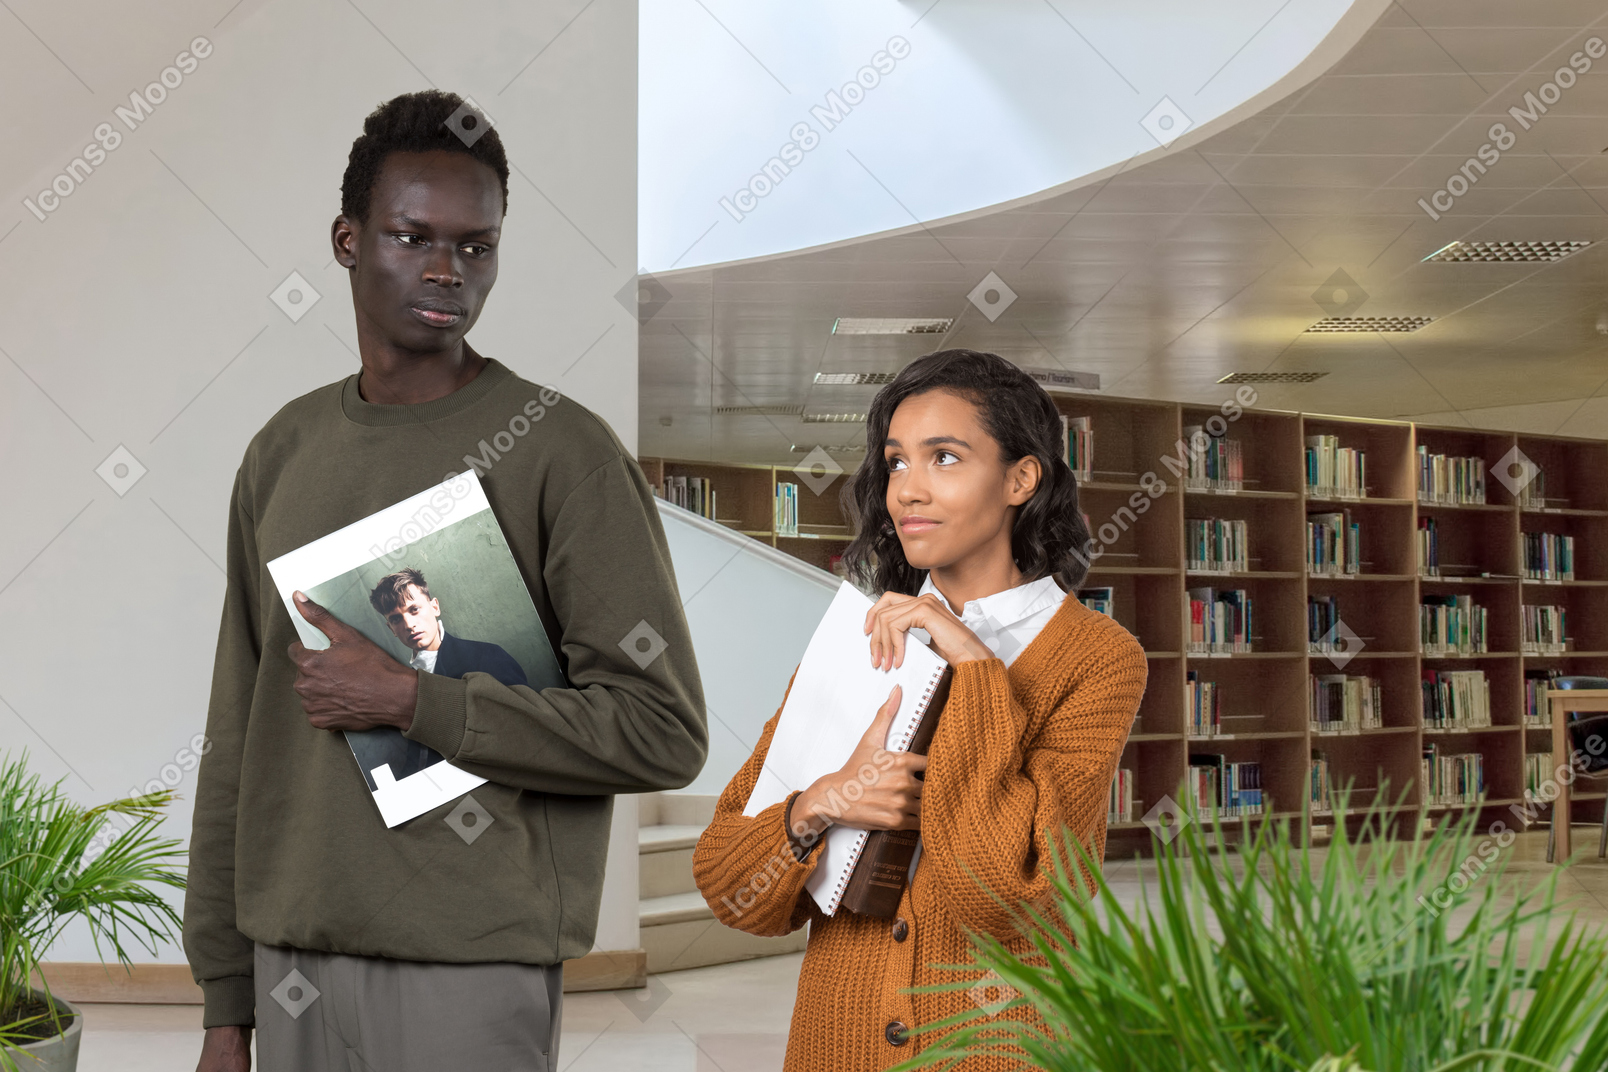 A black modestly dressed woman with books in her hands, looks lovingly at the serious black man in the library, who doesn't notice her look